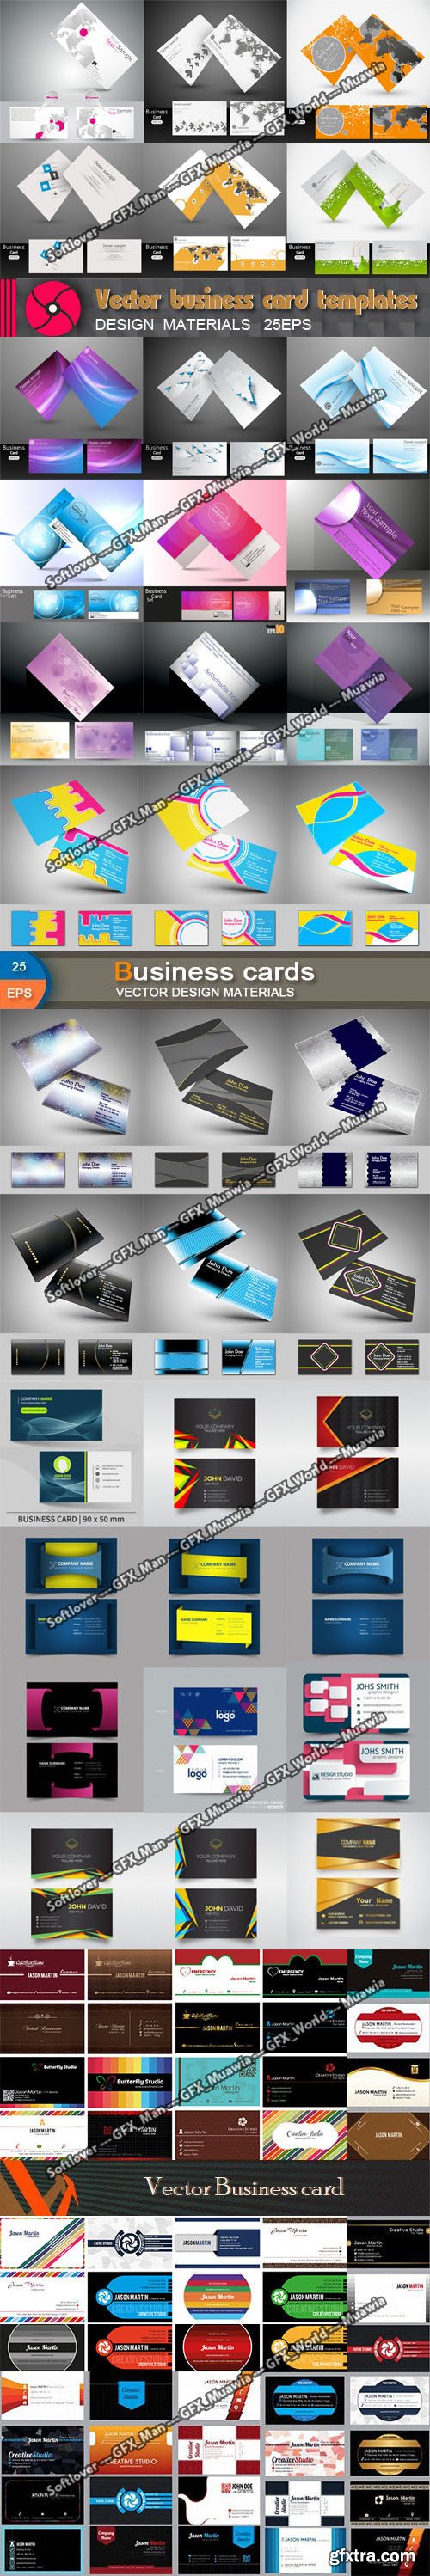 91 Business Card Templates Collection in Vector